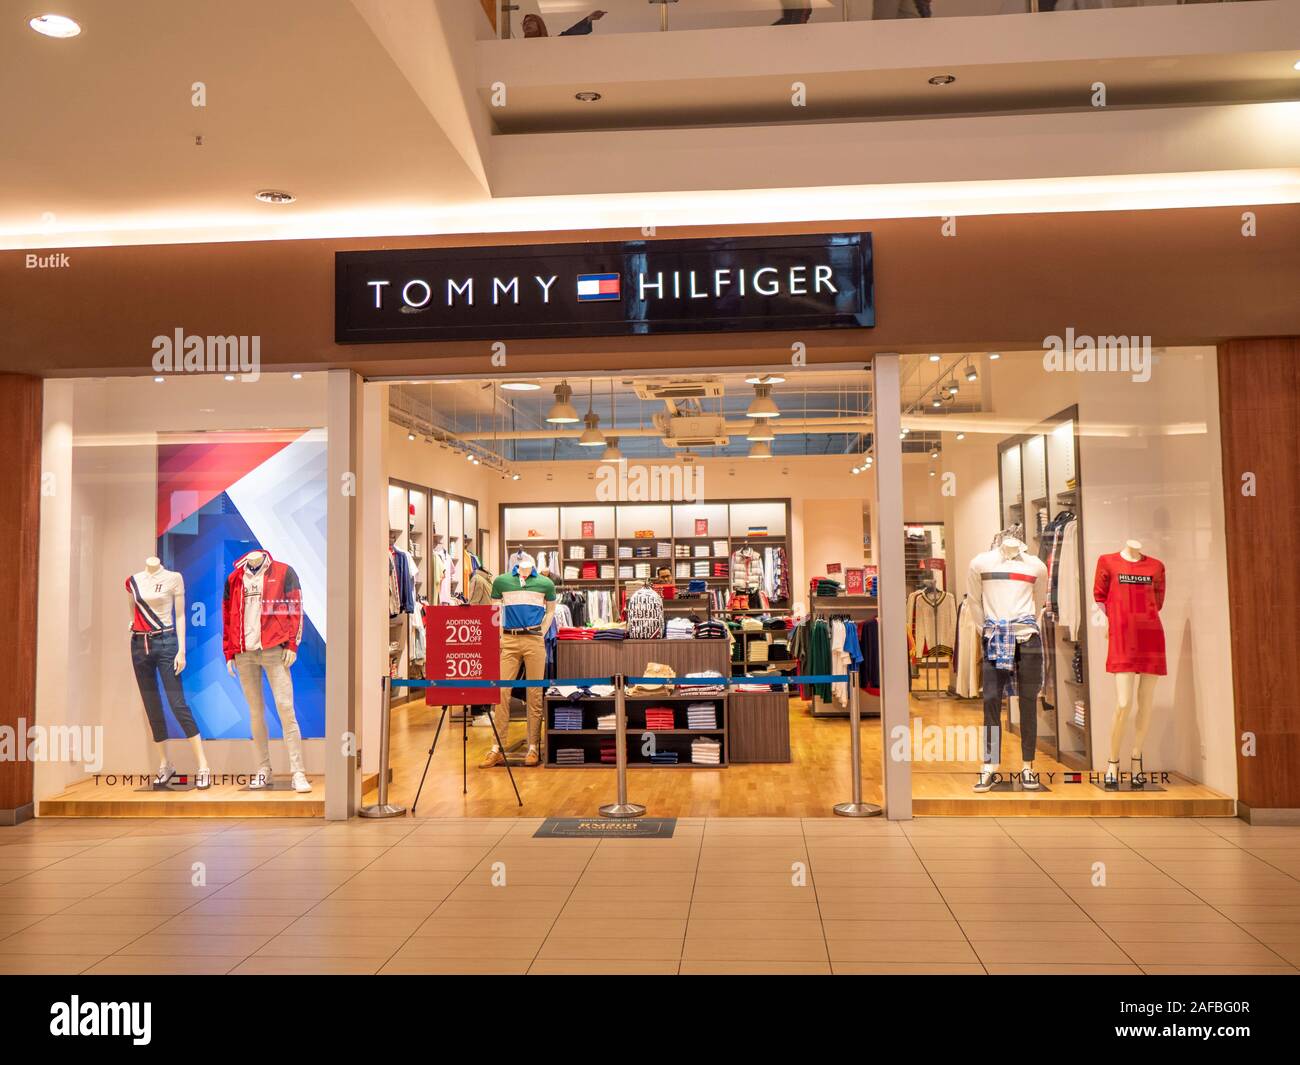 tommy hilfiger klcc Online shopping has 